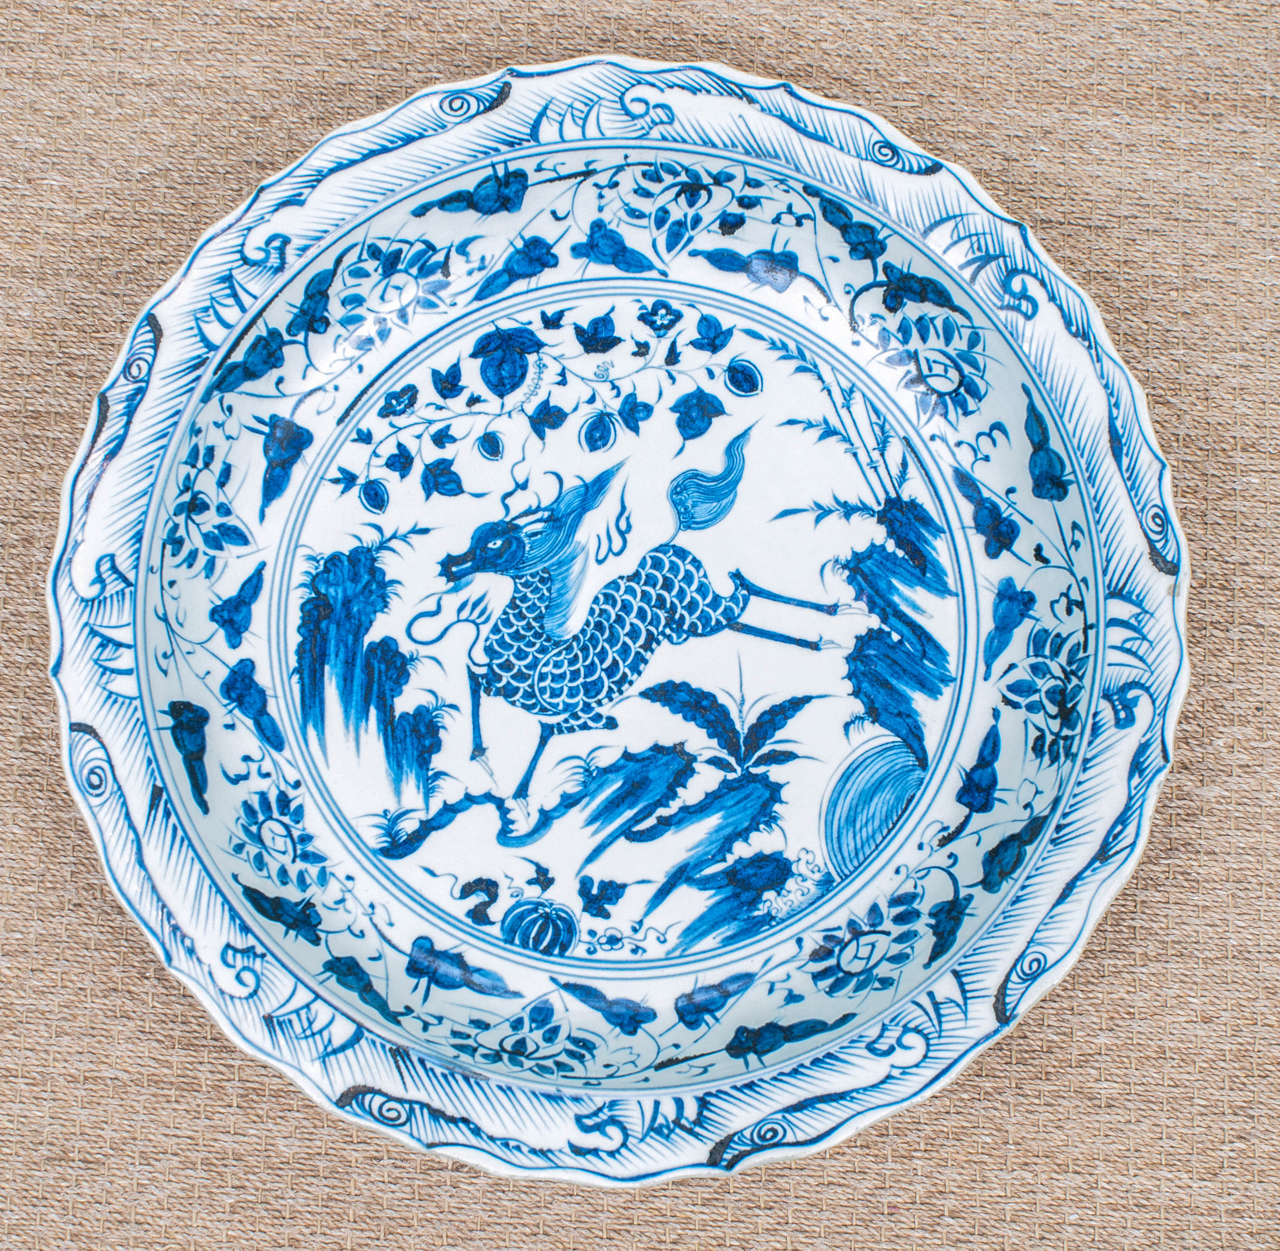 Stately Chinese charger expertly hand painted with mythical animal motif. From the Jingdezhen region of China, home of the Imperial kilns of the emperors.